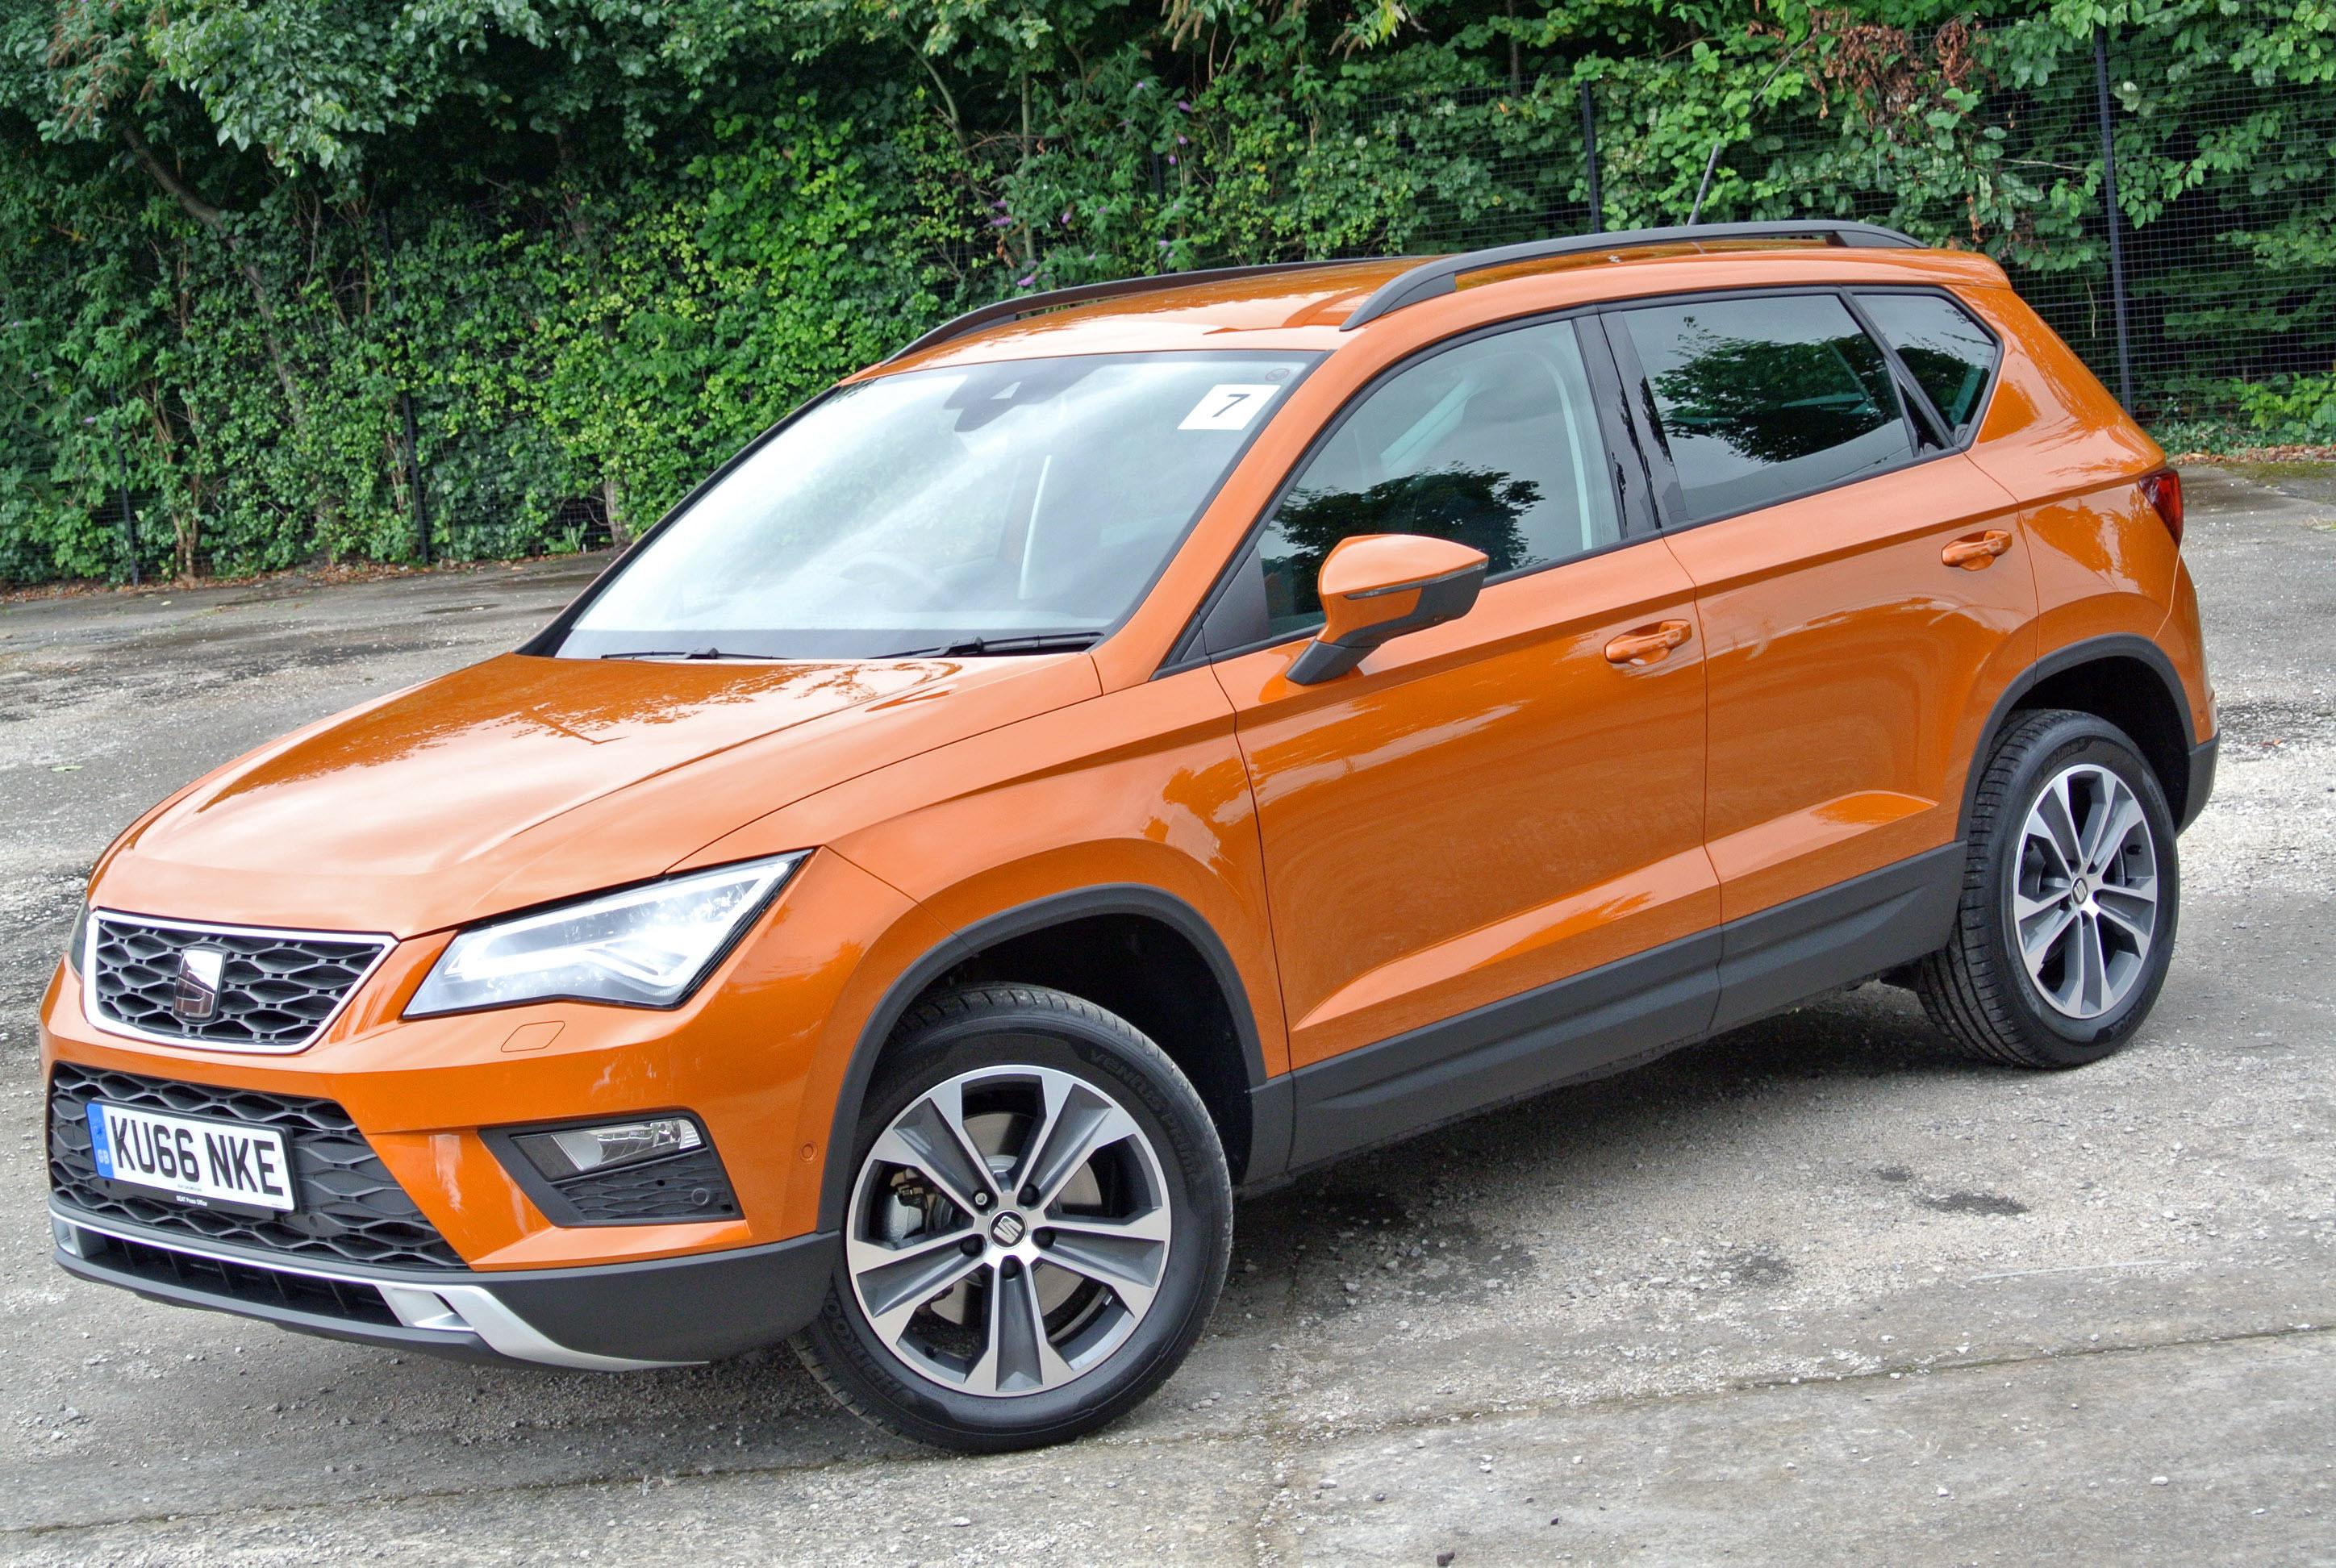 Seat Ateca can monster the SUV scene, as the price is right